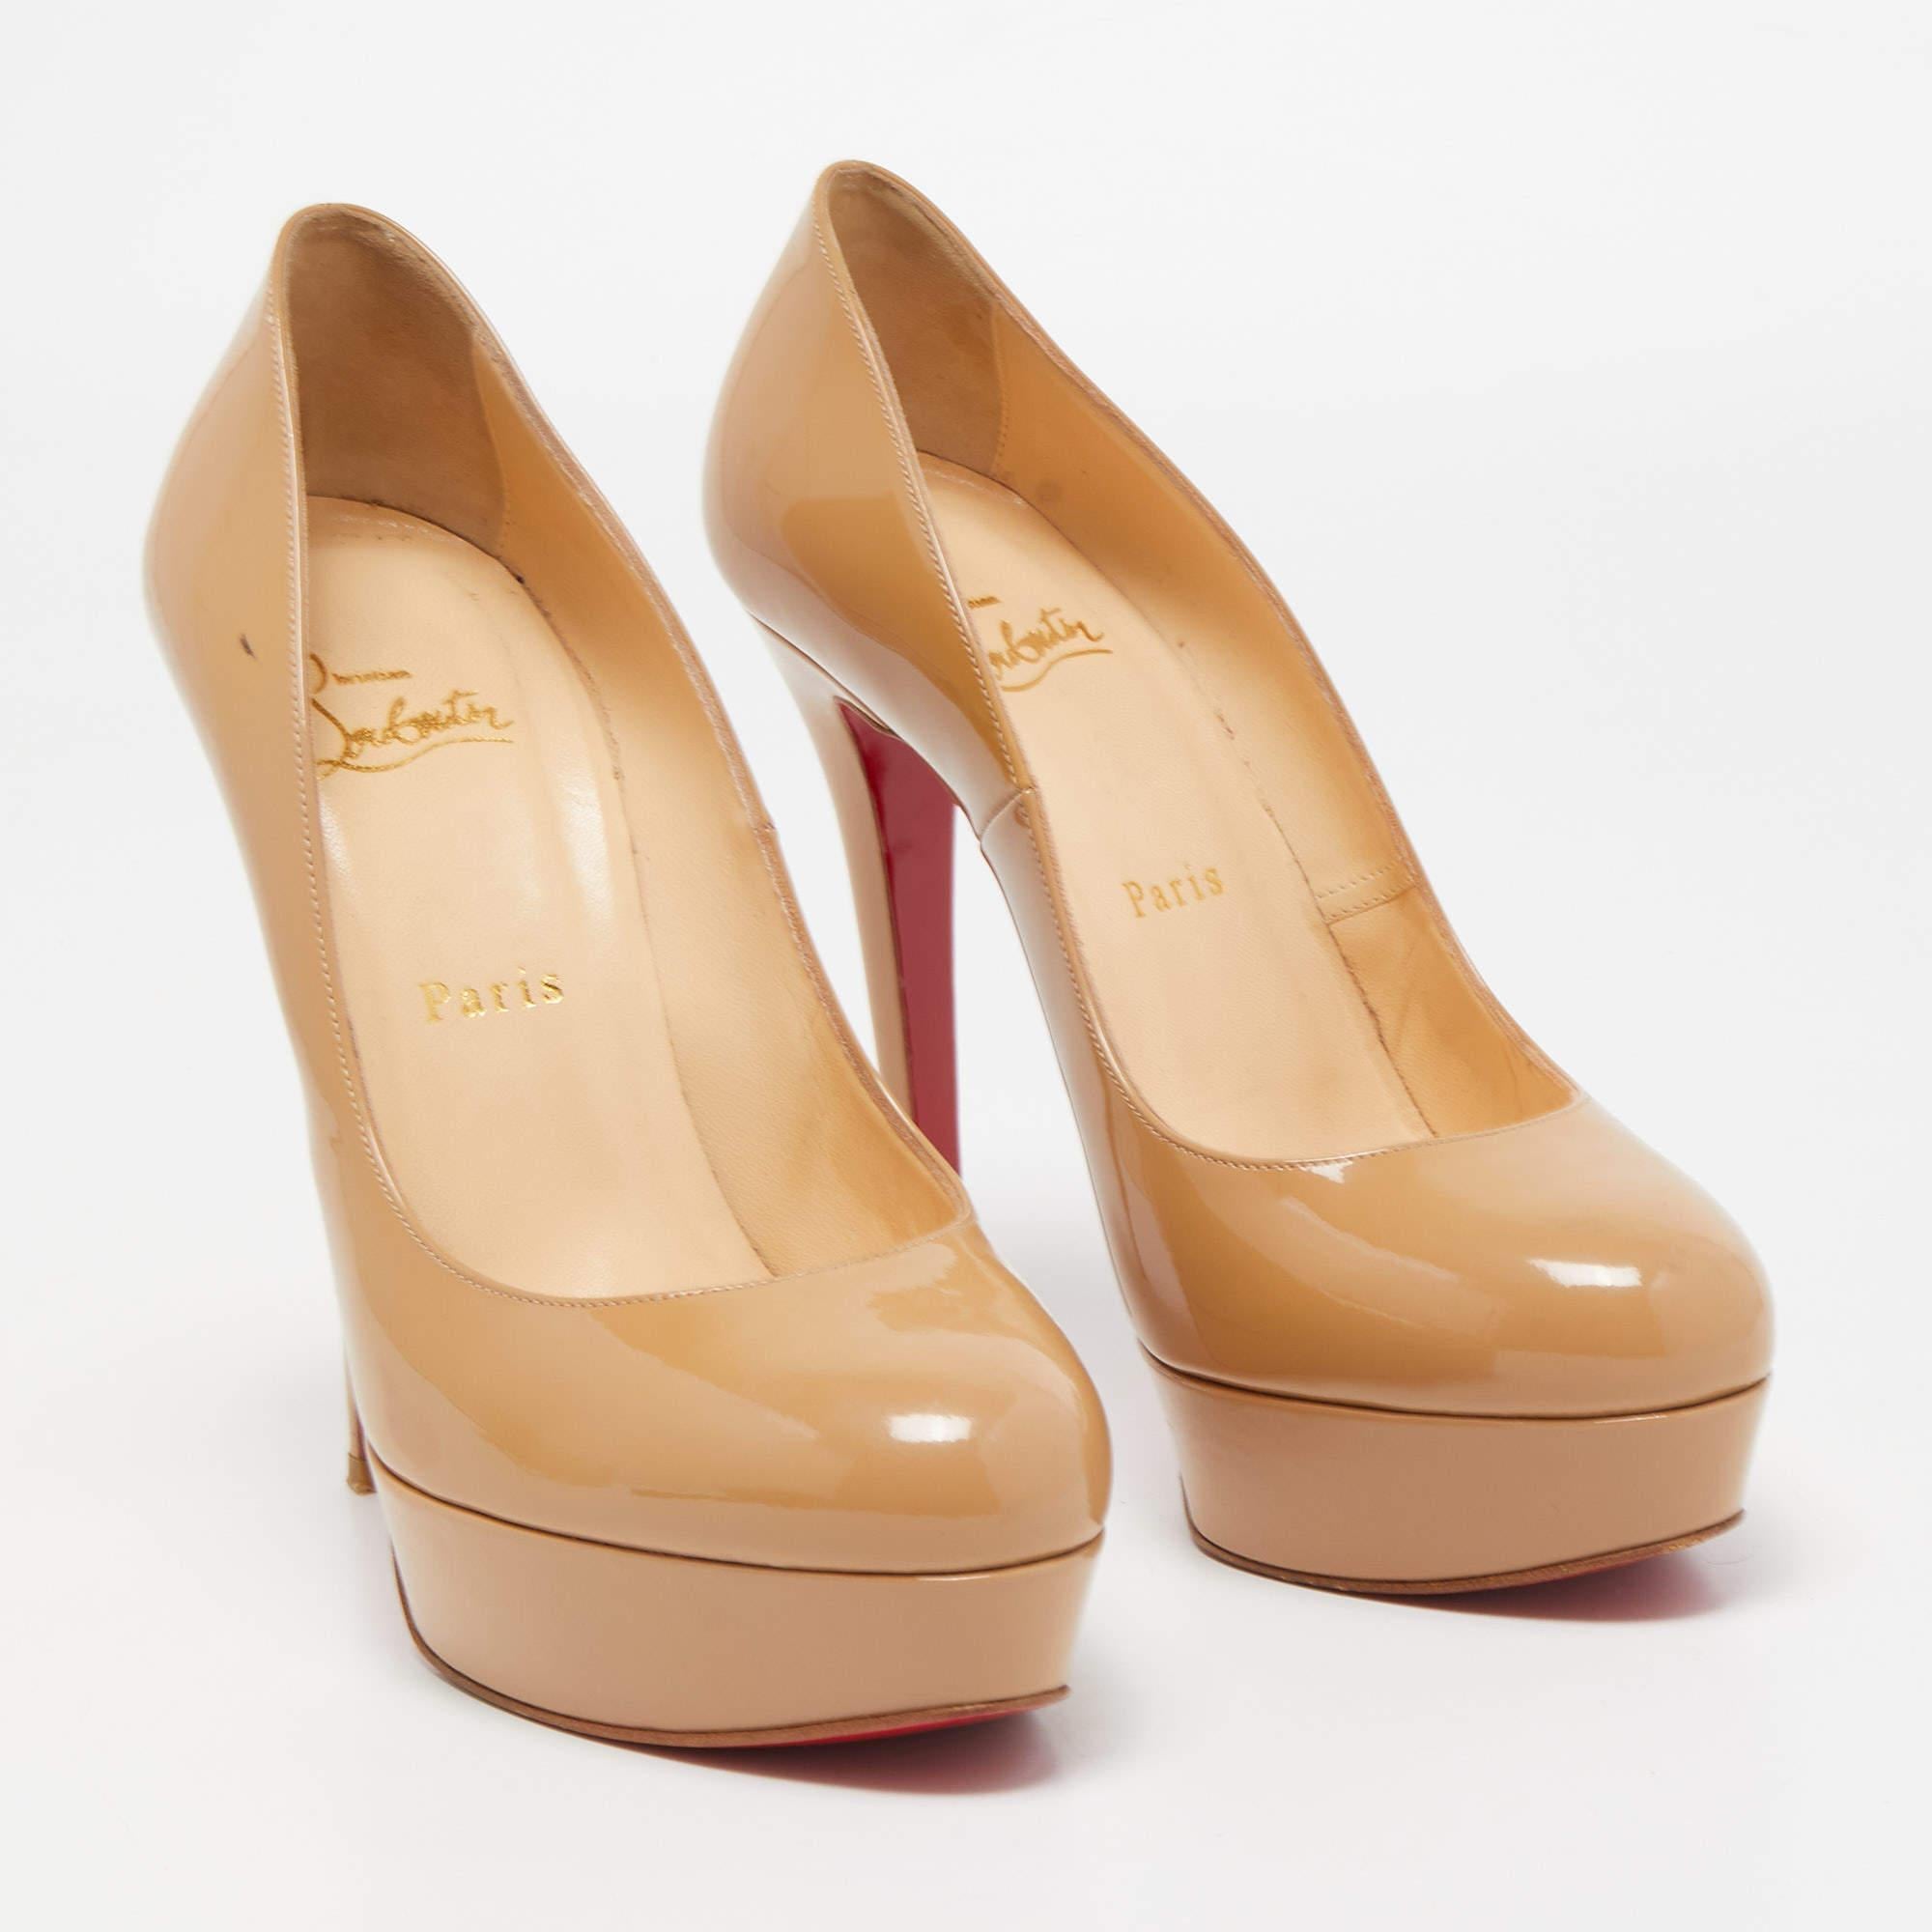 Every flawless design of Christian Louboutin, like this pair of Bianca pumps, is the epitome of feminine style. Crafted from patent leather, its upper is balanced on 13.5cm heels and platforms. The signature red-lacquered sole of these shoes marks